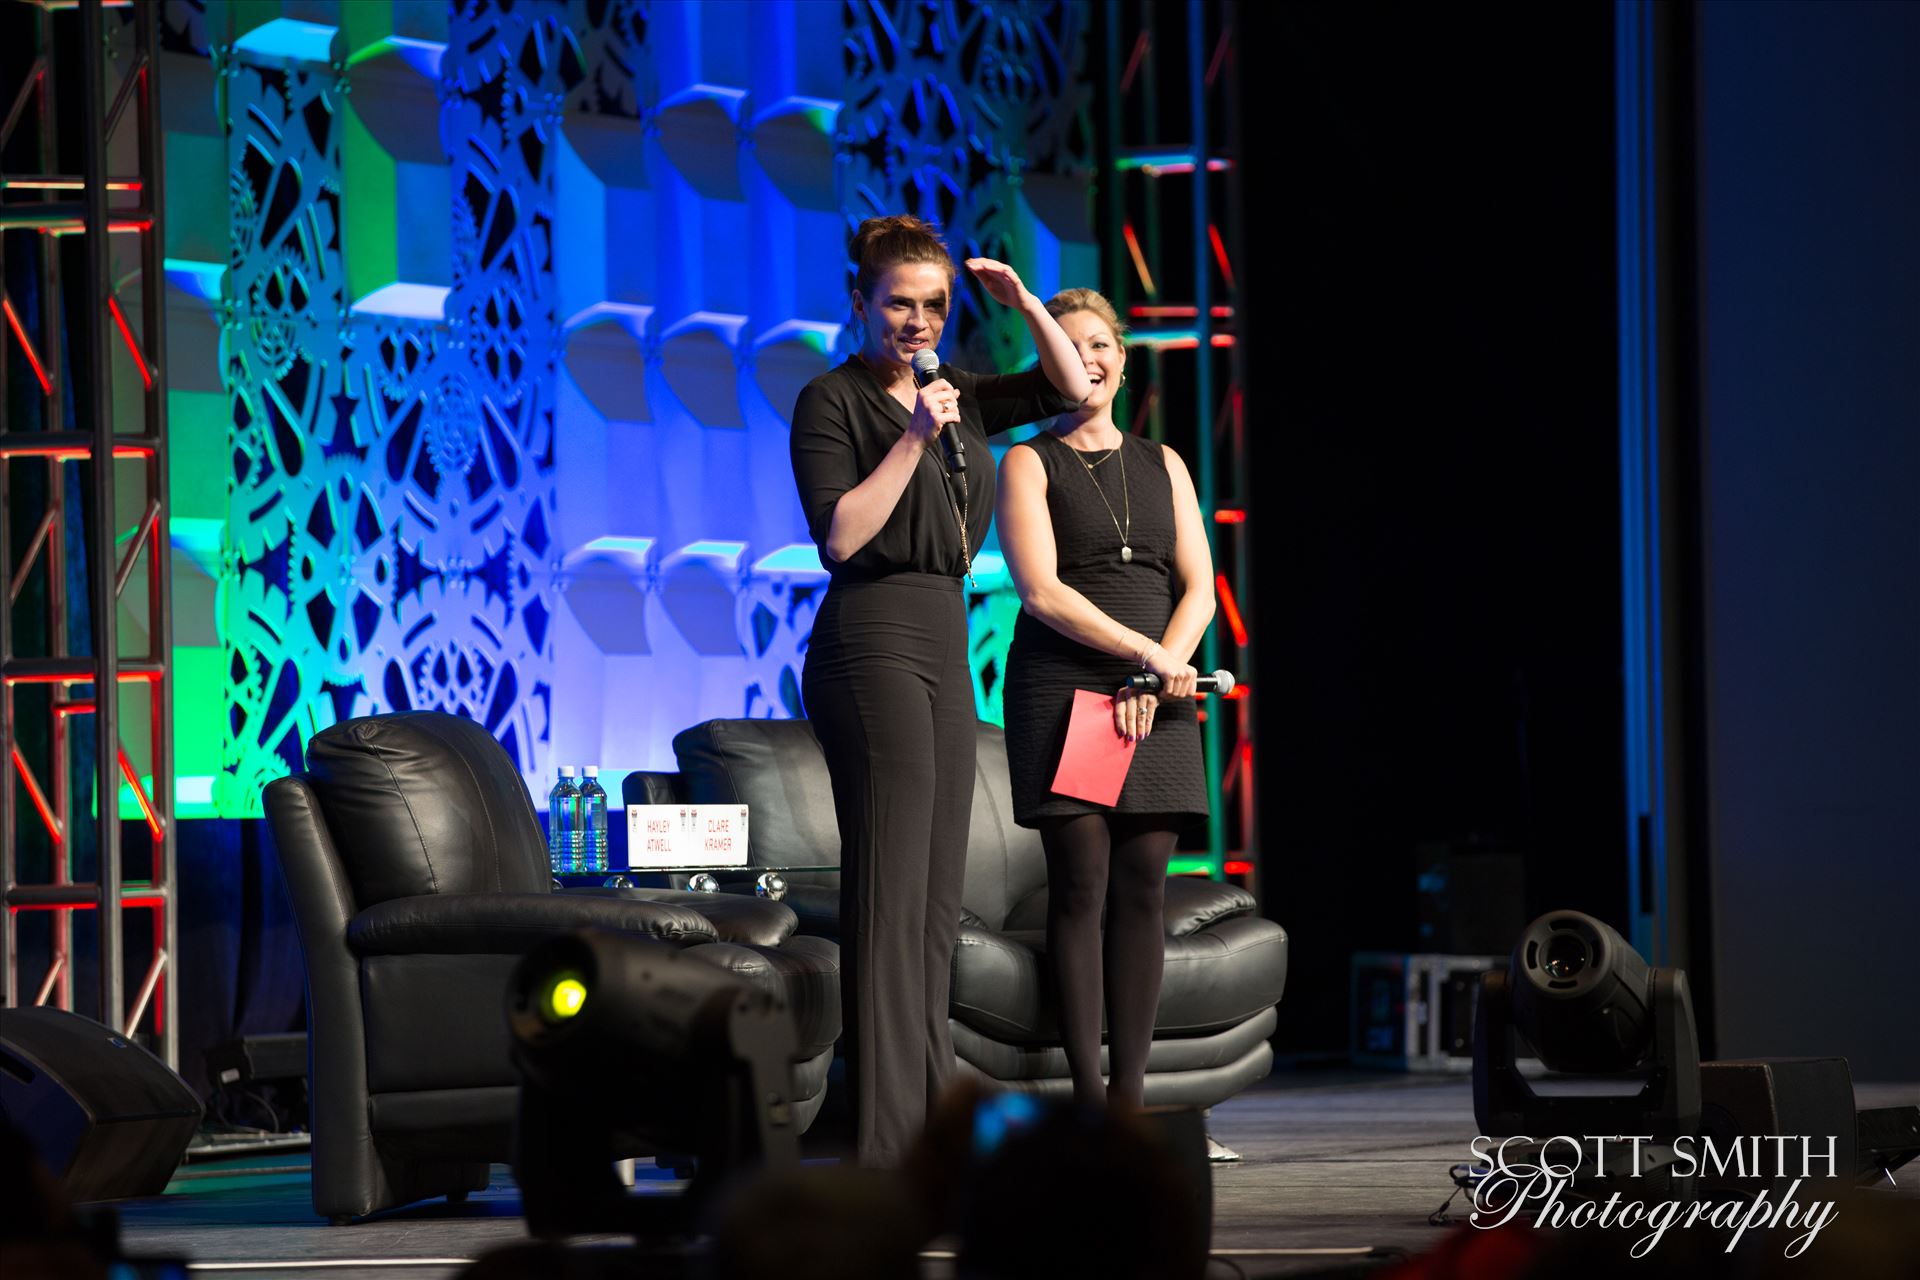 Denver Comic Con 2016 16 - Denver Comic Con 2016 at the Colorado Convention Center. Clare Kramer and Haley Atwell. by Scott Smith Photos